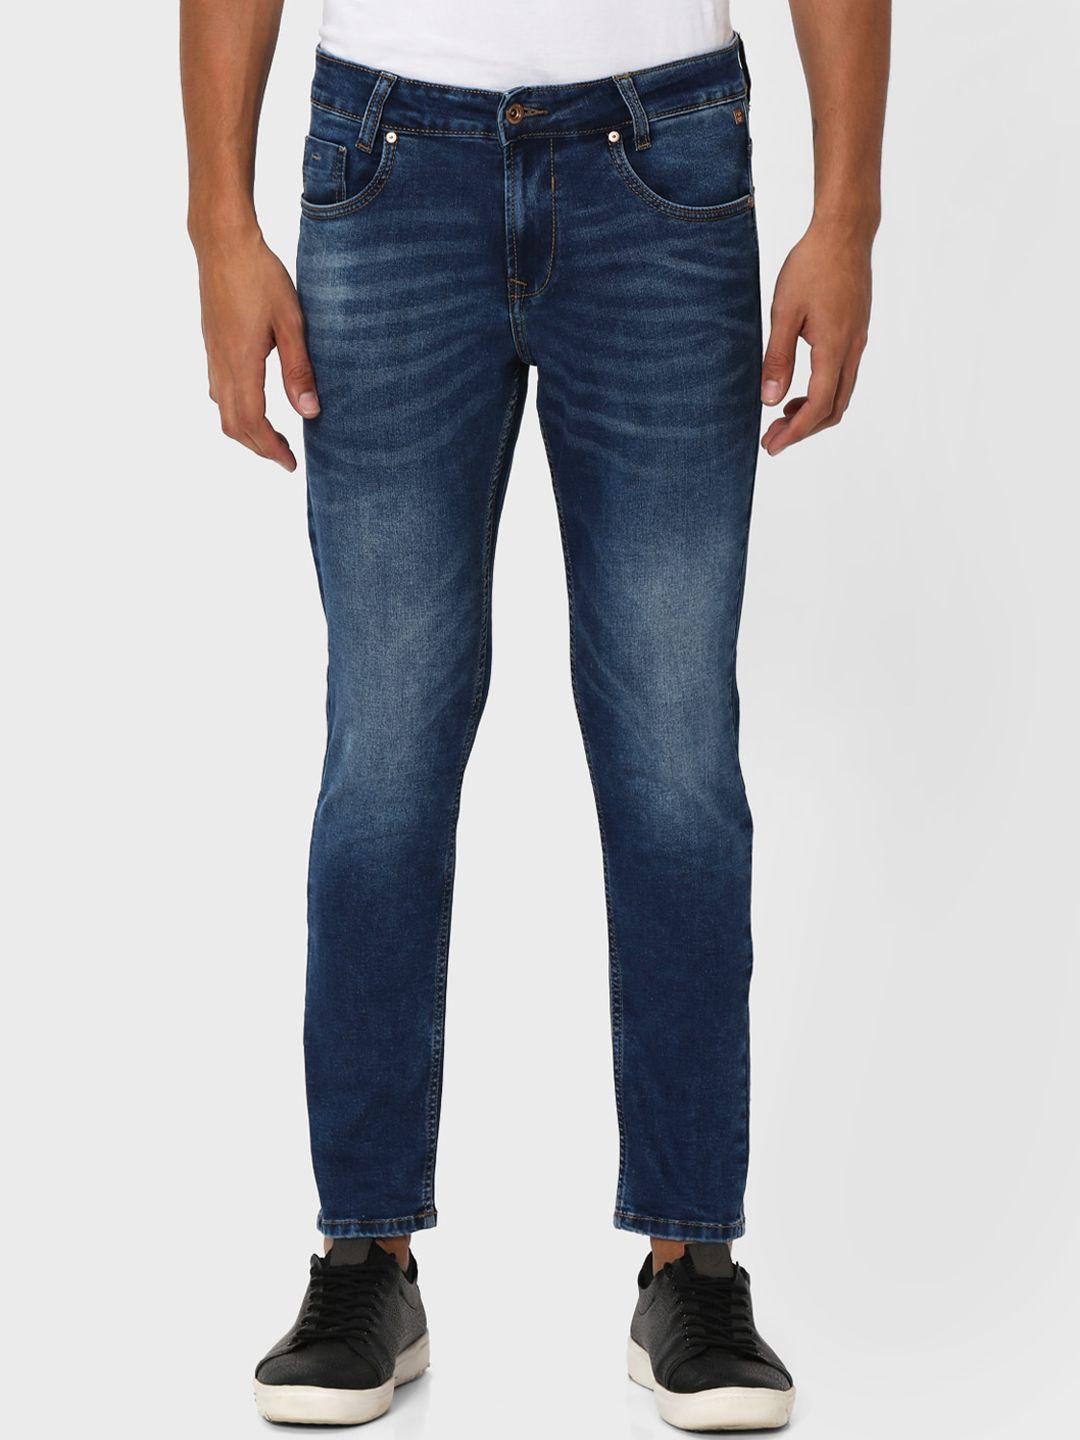 mufti-men-tapered-fit-heavy-fade-stretchable-jeans